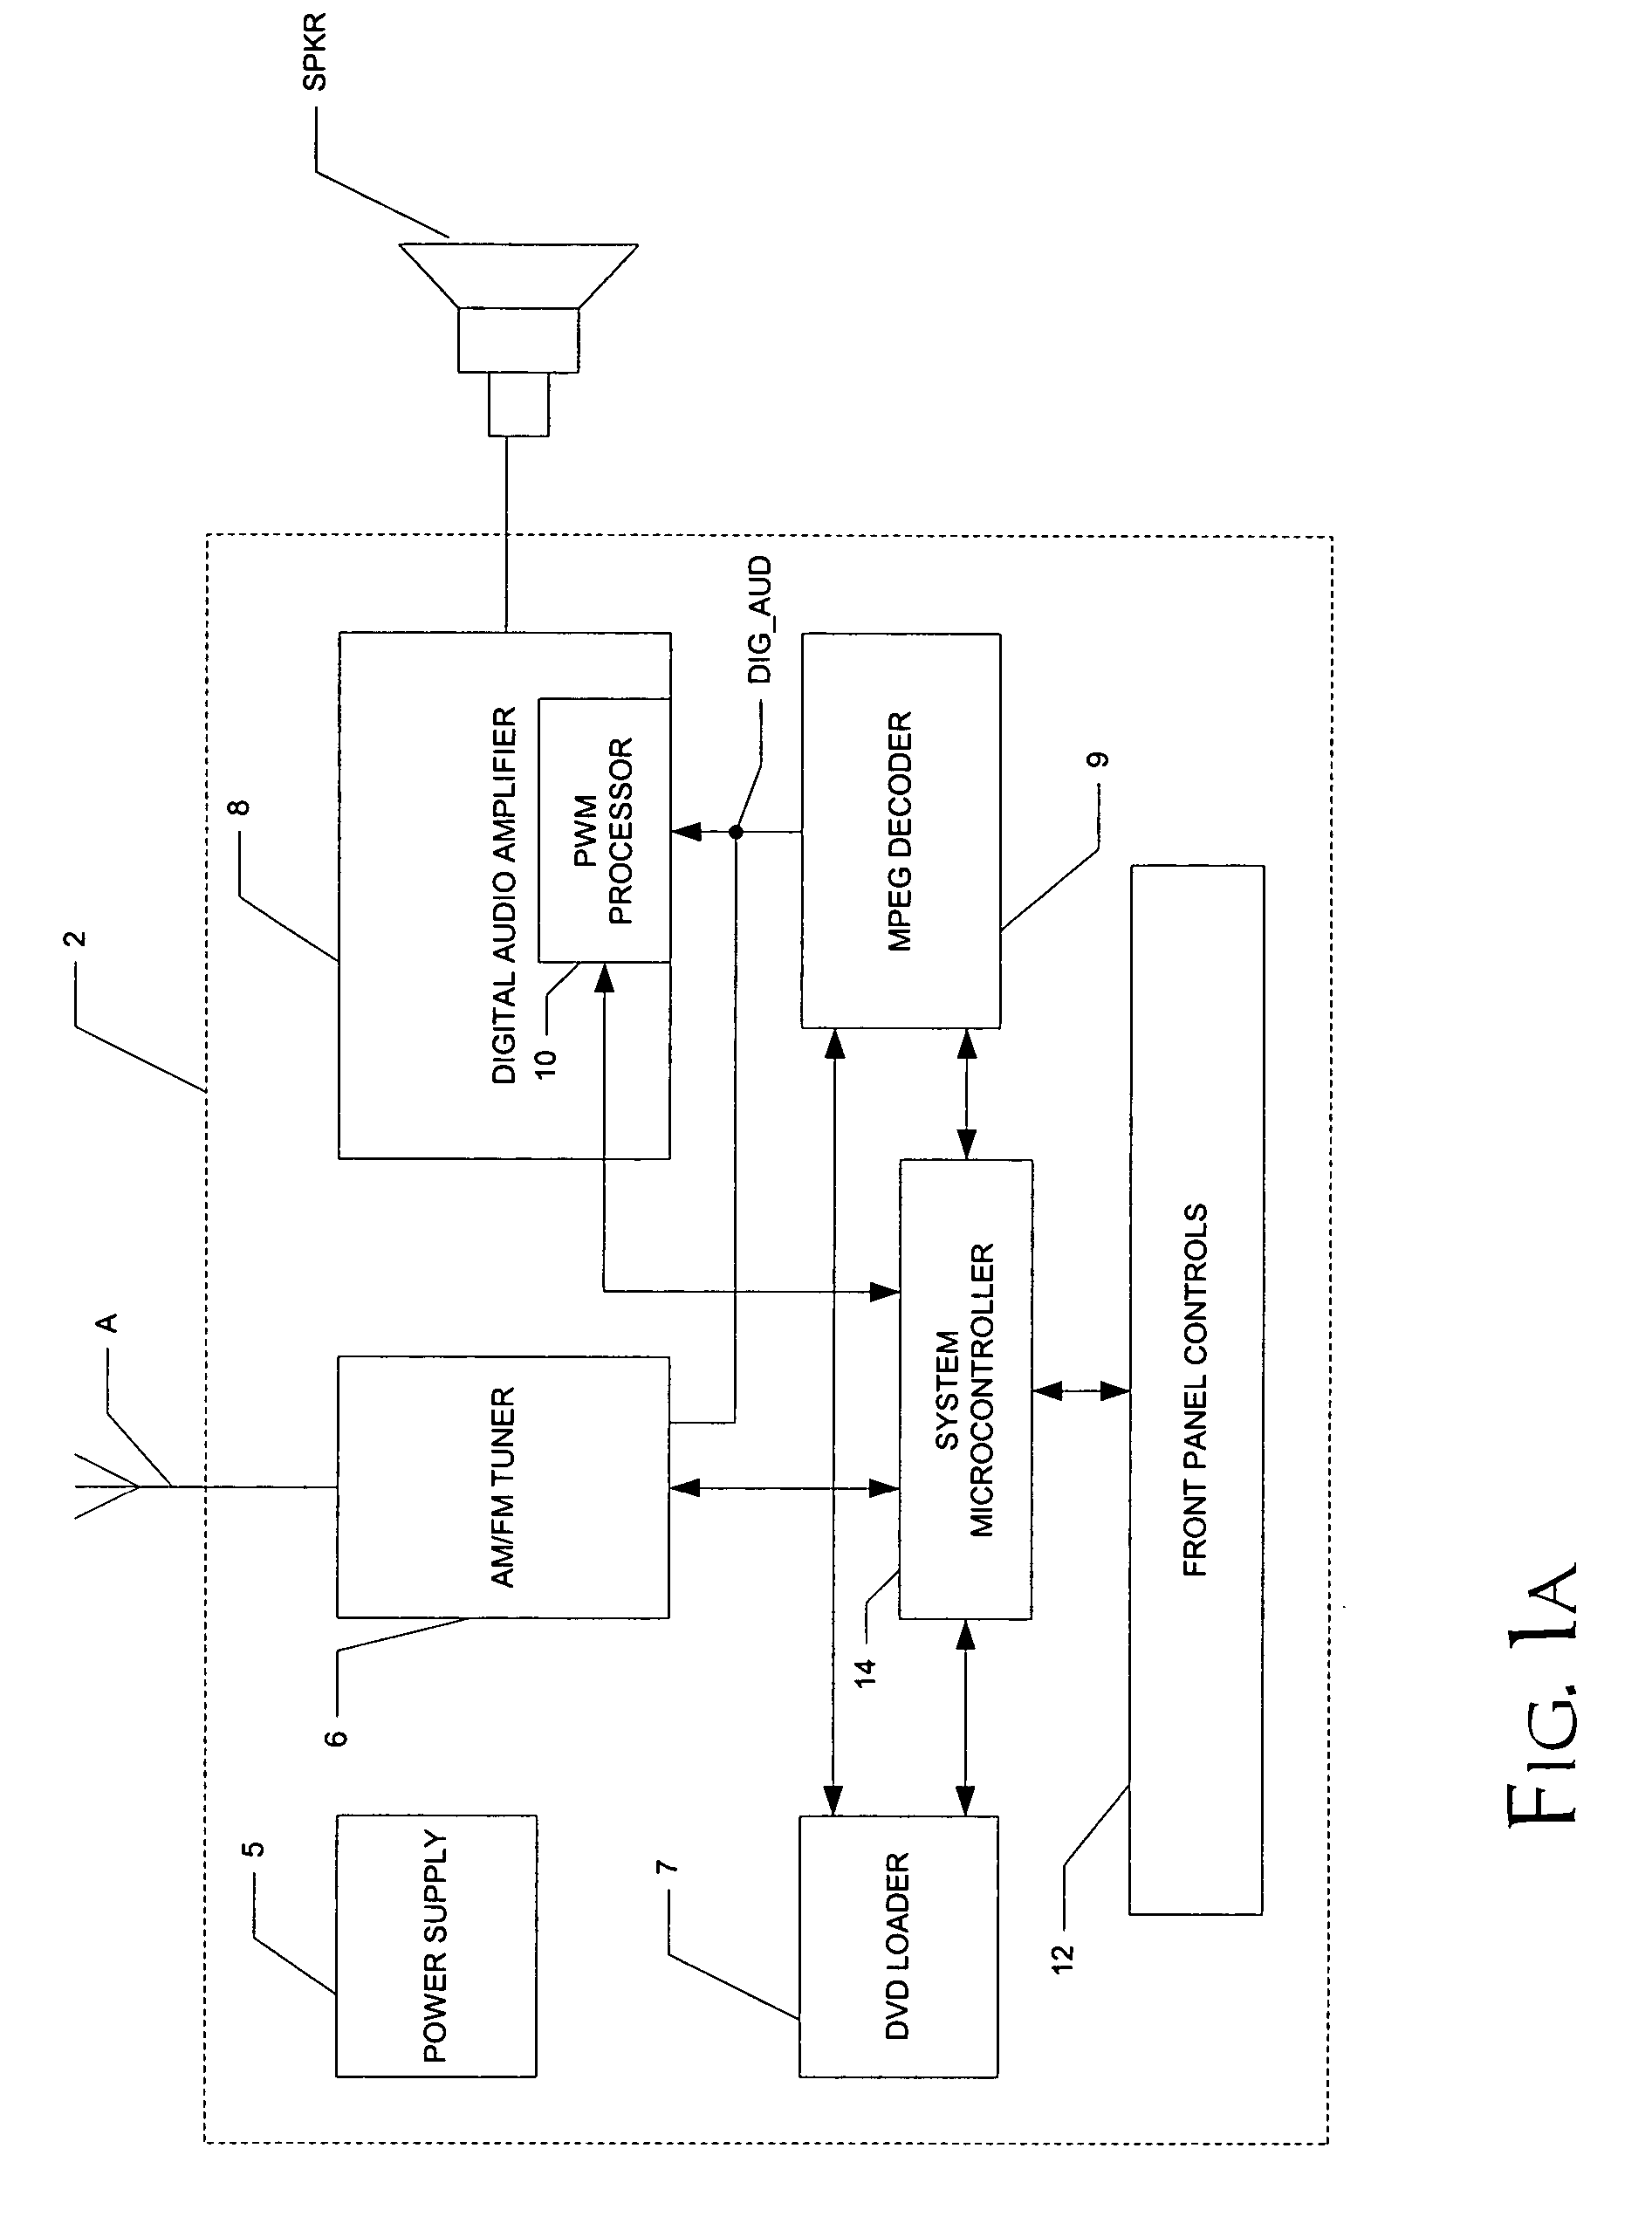 Digital audio receiver with reduced AM interference